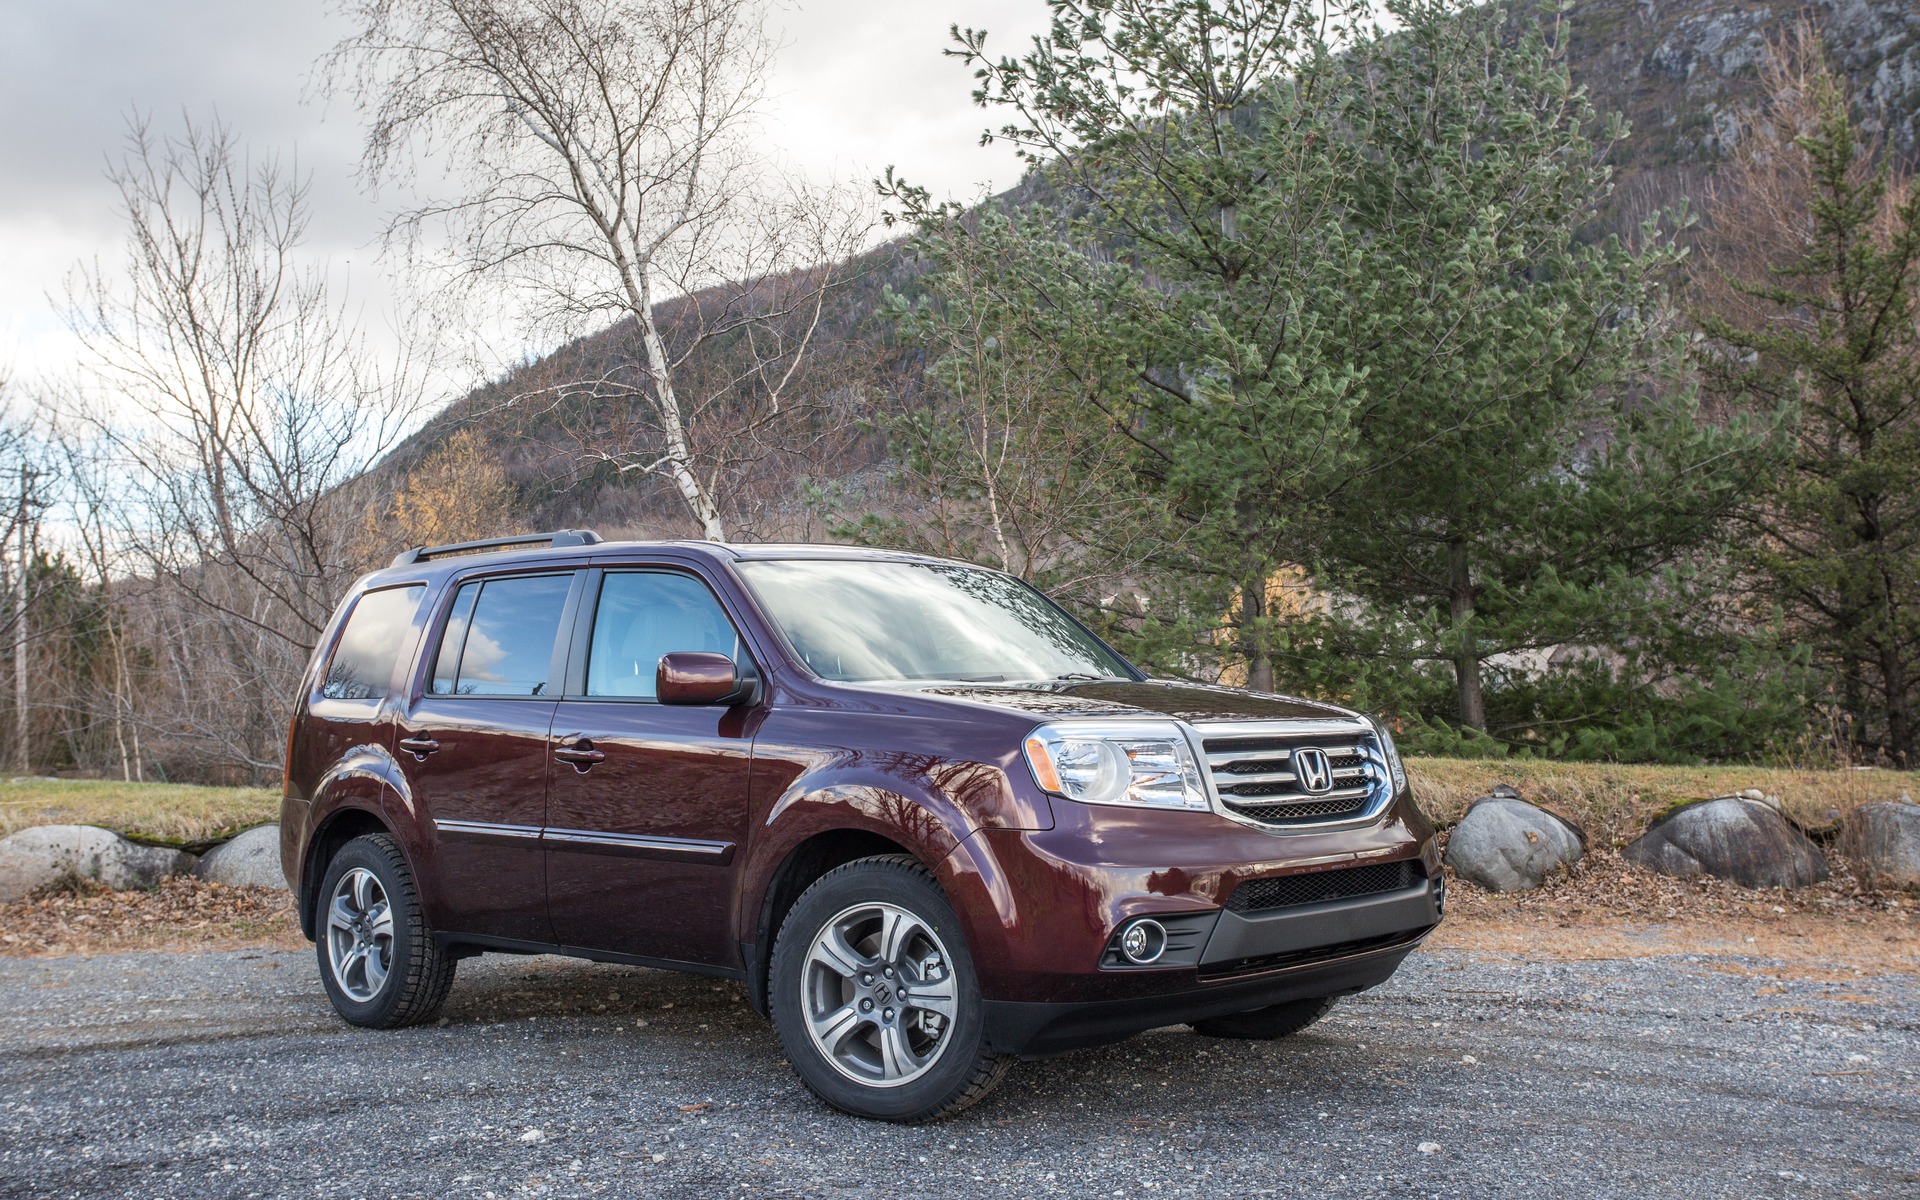 In a world of curvy vehicles, the Honda Pilot stands alone.